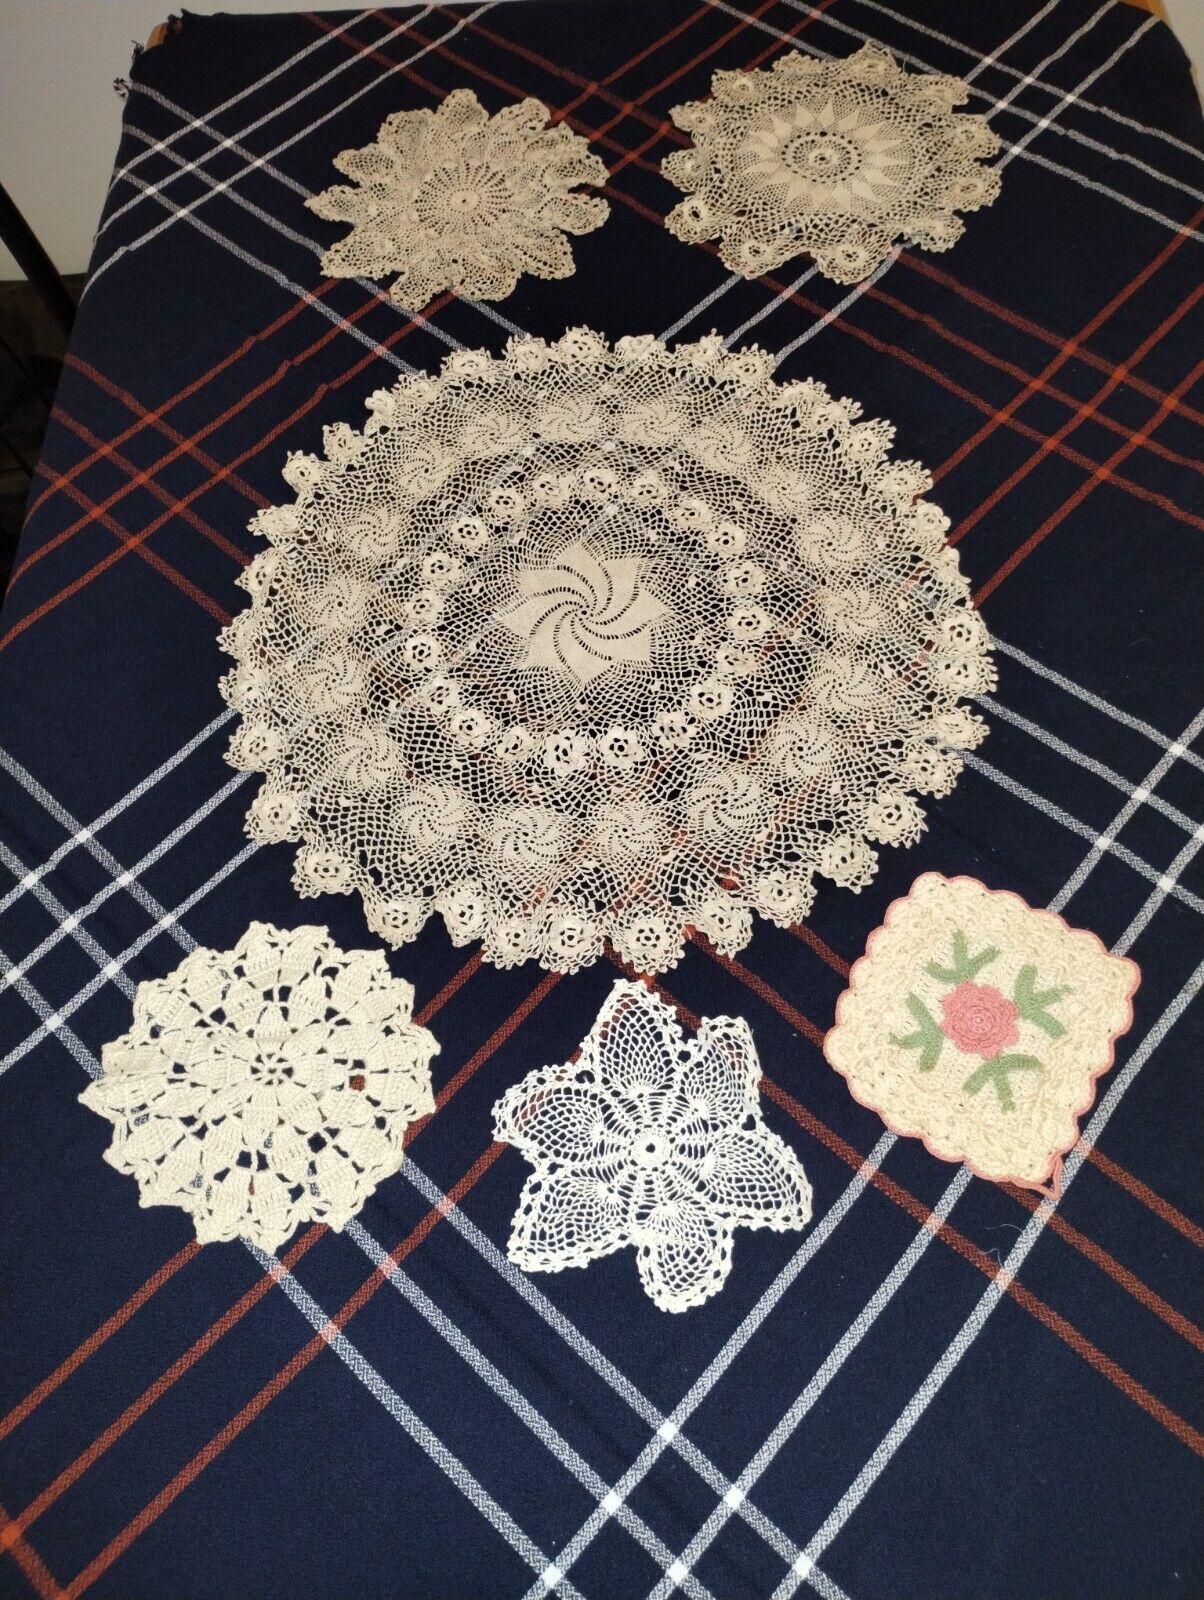 Vintage Handmade Crochet Doilies Lot Of 6 Small To Large Sizes